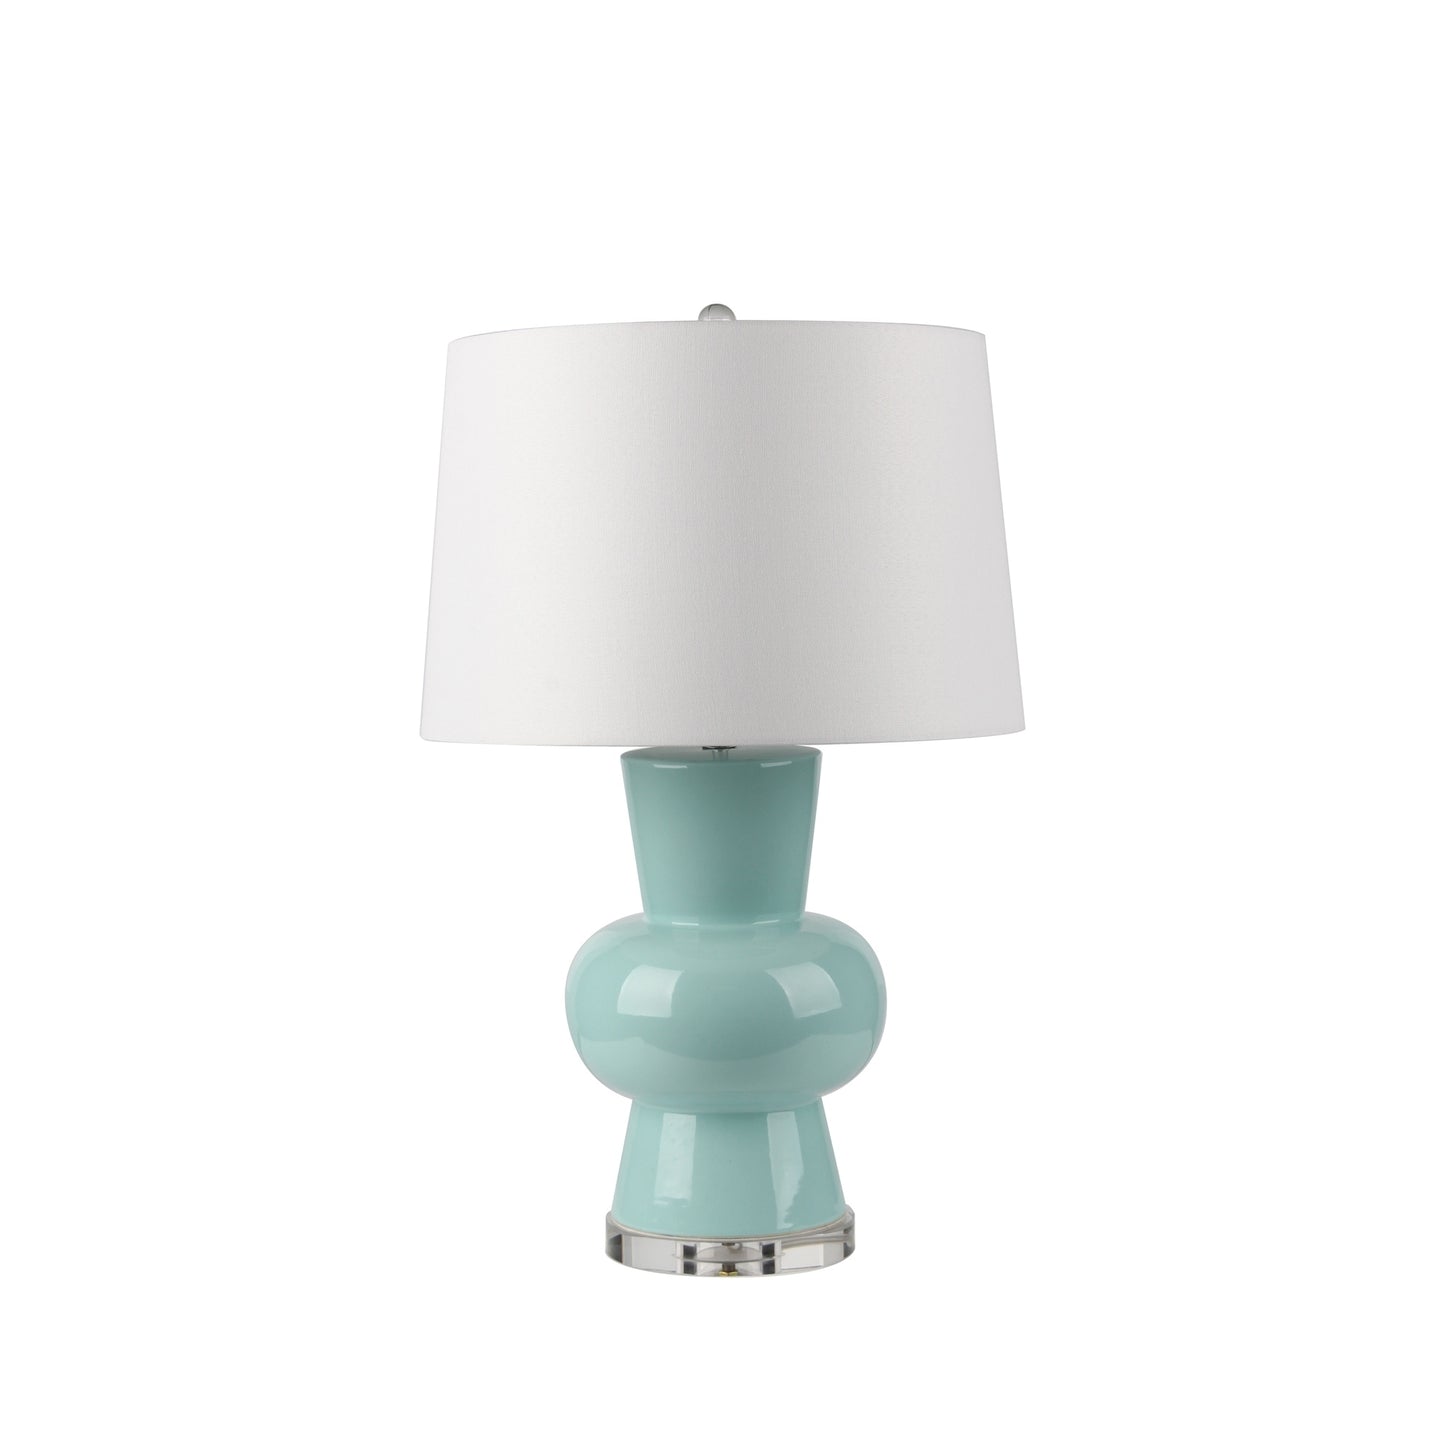 Pair of Light Blue Single Gourd Table Lamps